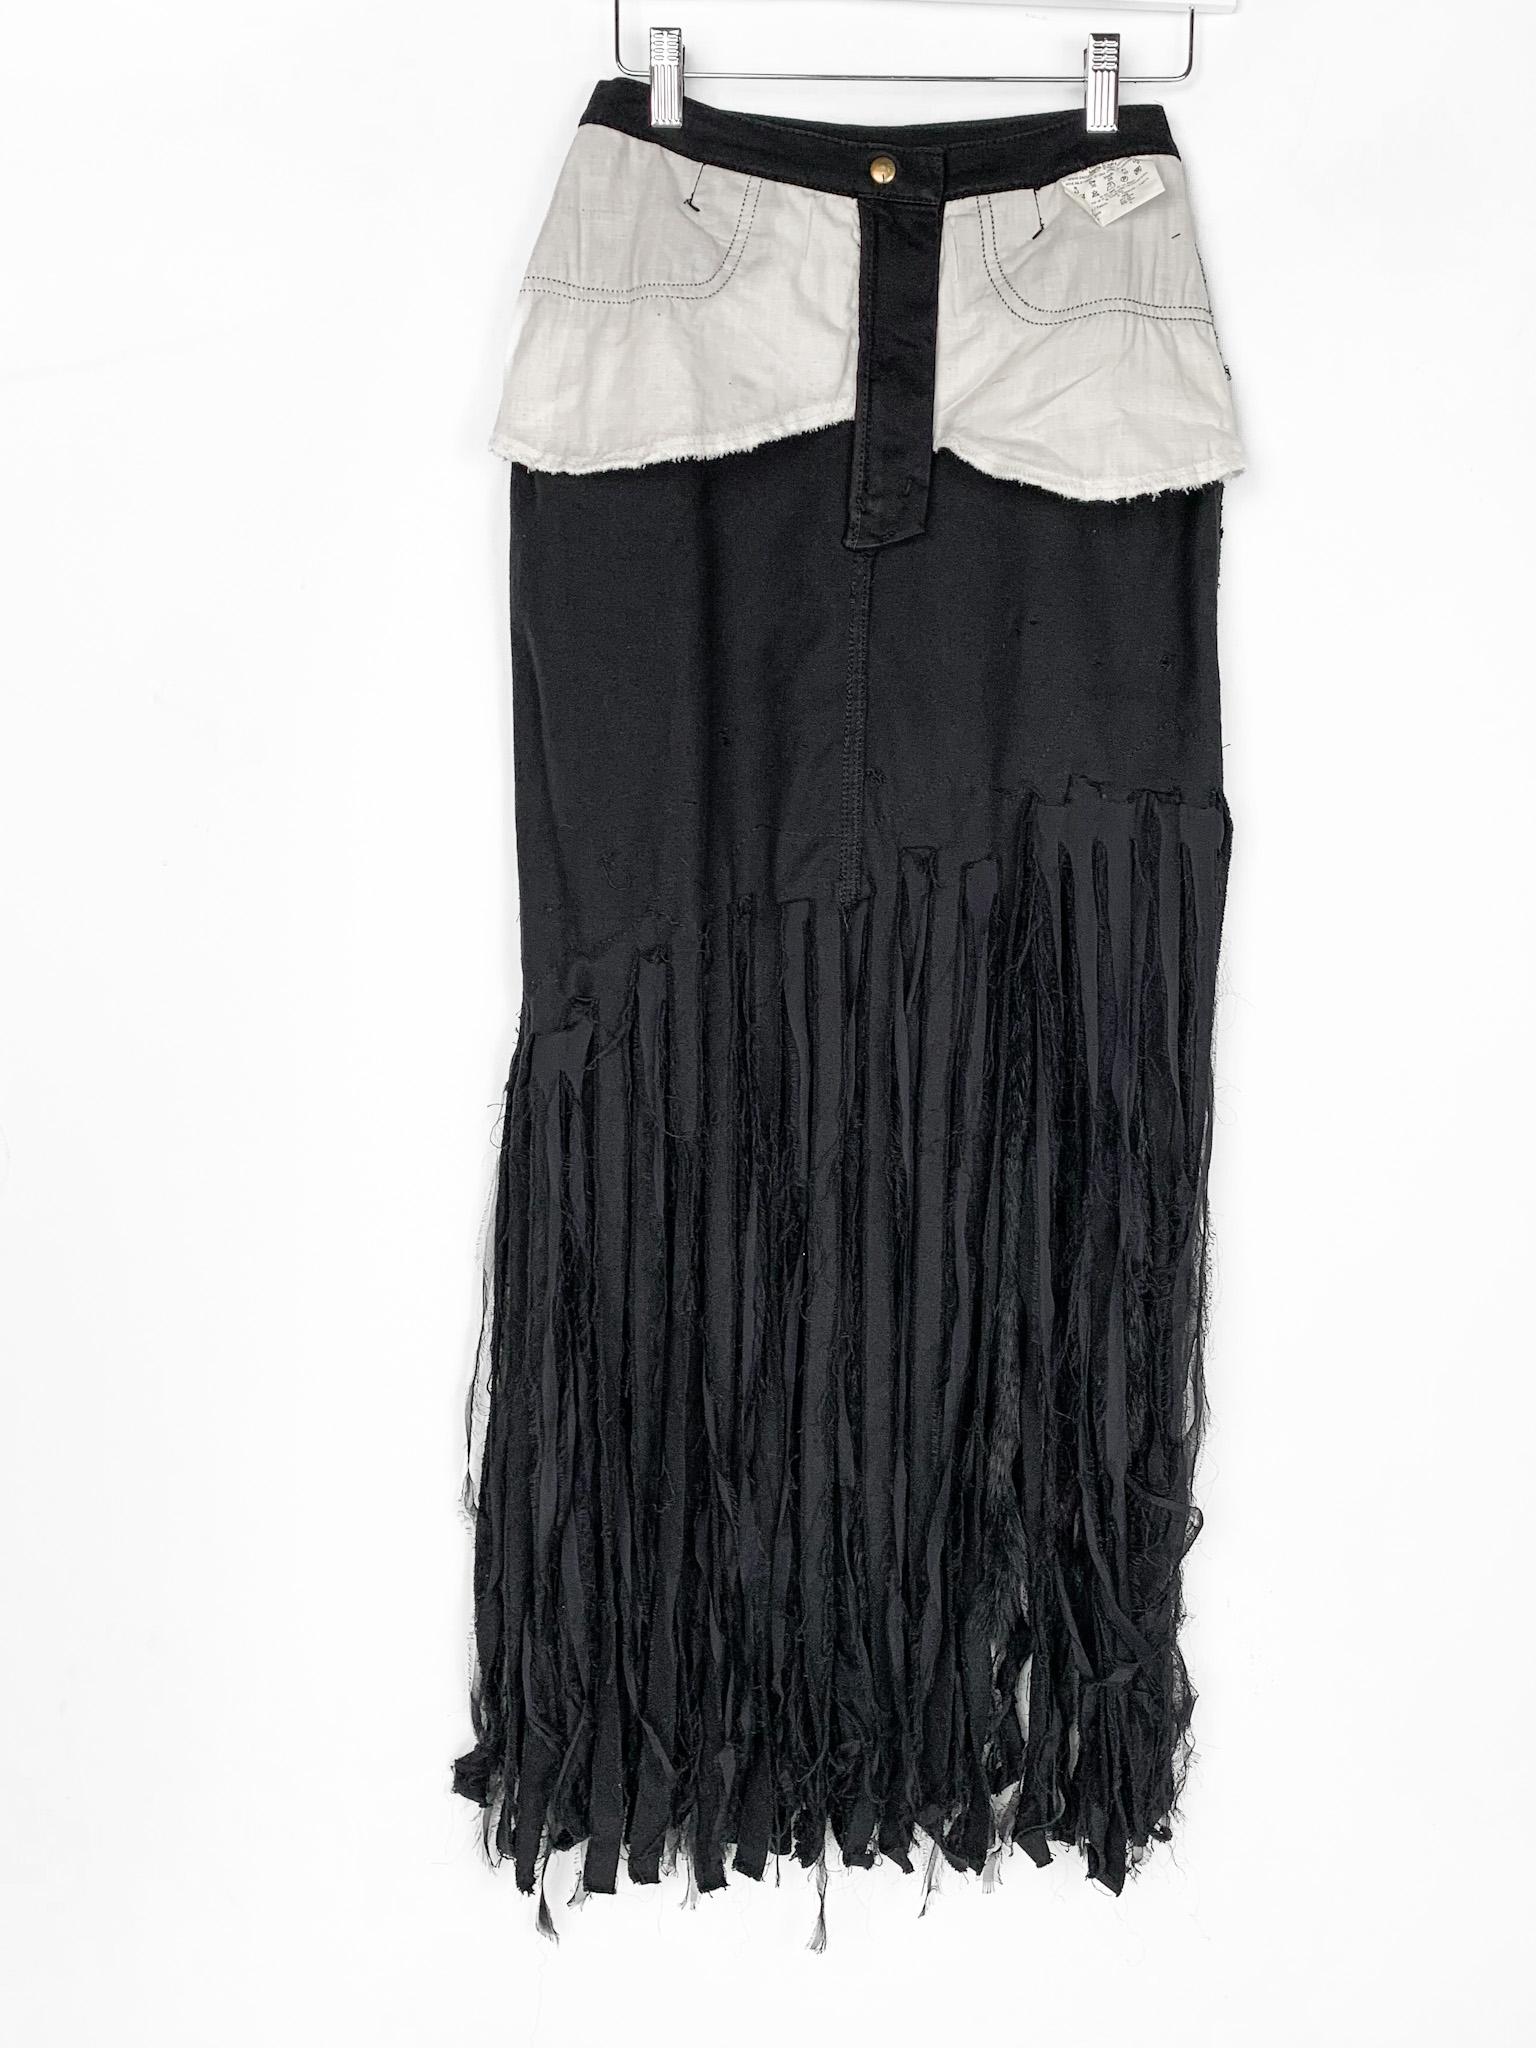 Ungaro 1990s vintage extravagant fringed maxi skirt with details in faux fur 5